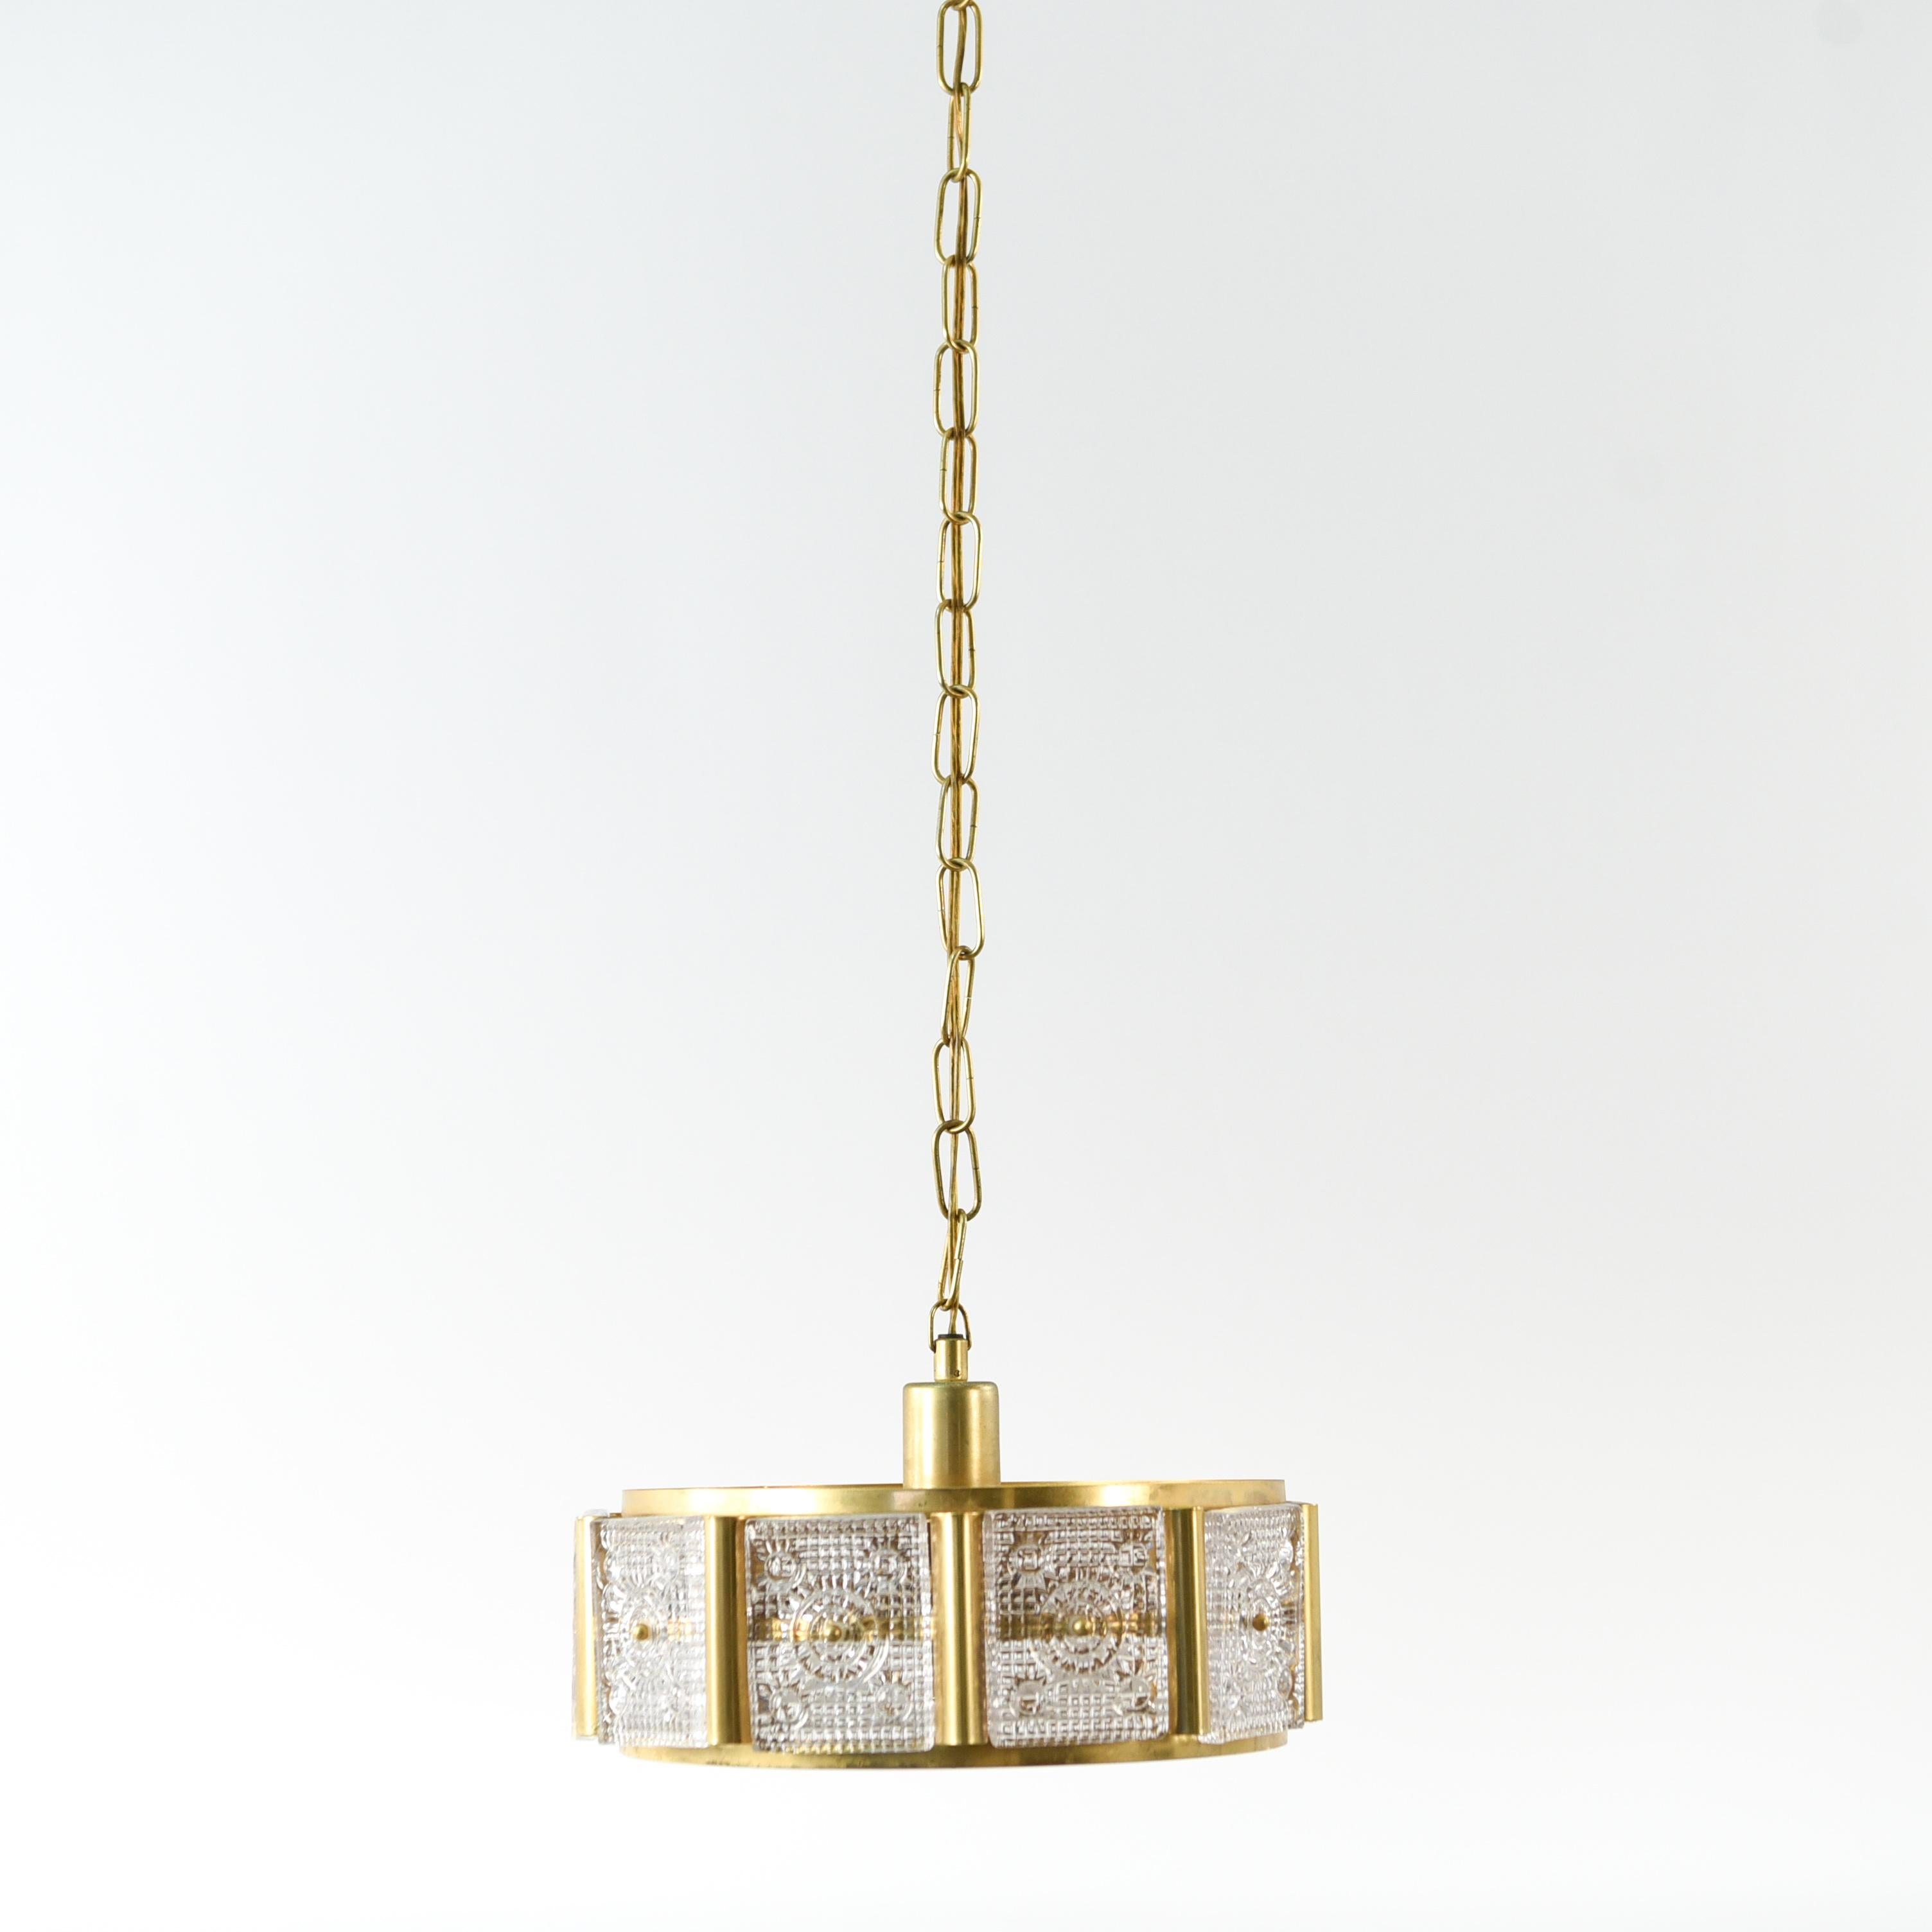 This crystal and brass pendant chandelier was designed by Carl Fagerlund for Orrefors, circa 1960s. This piece has beautifully designed crystal panels in a brass framework and is in a short cylindrical form, characteristic of most of Fagerlund's